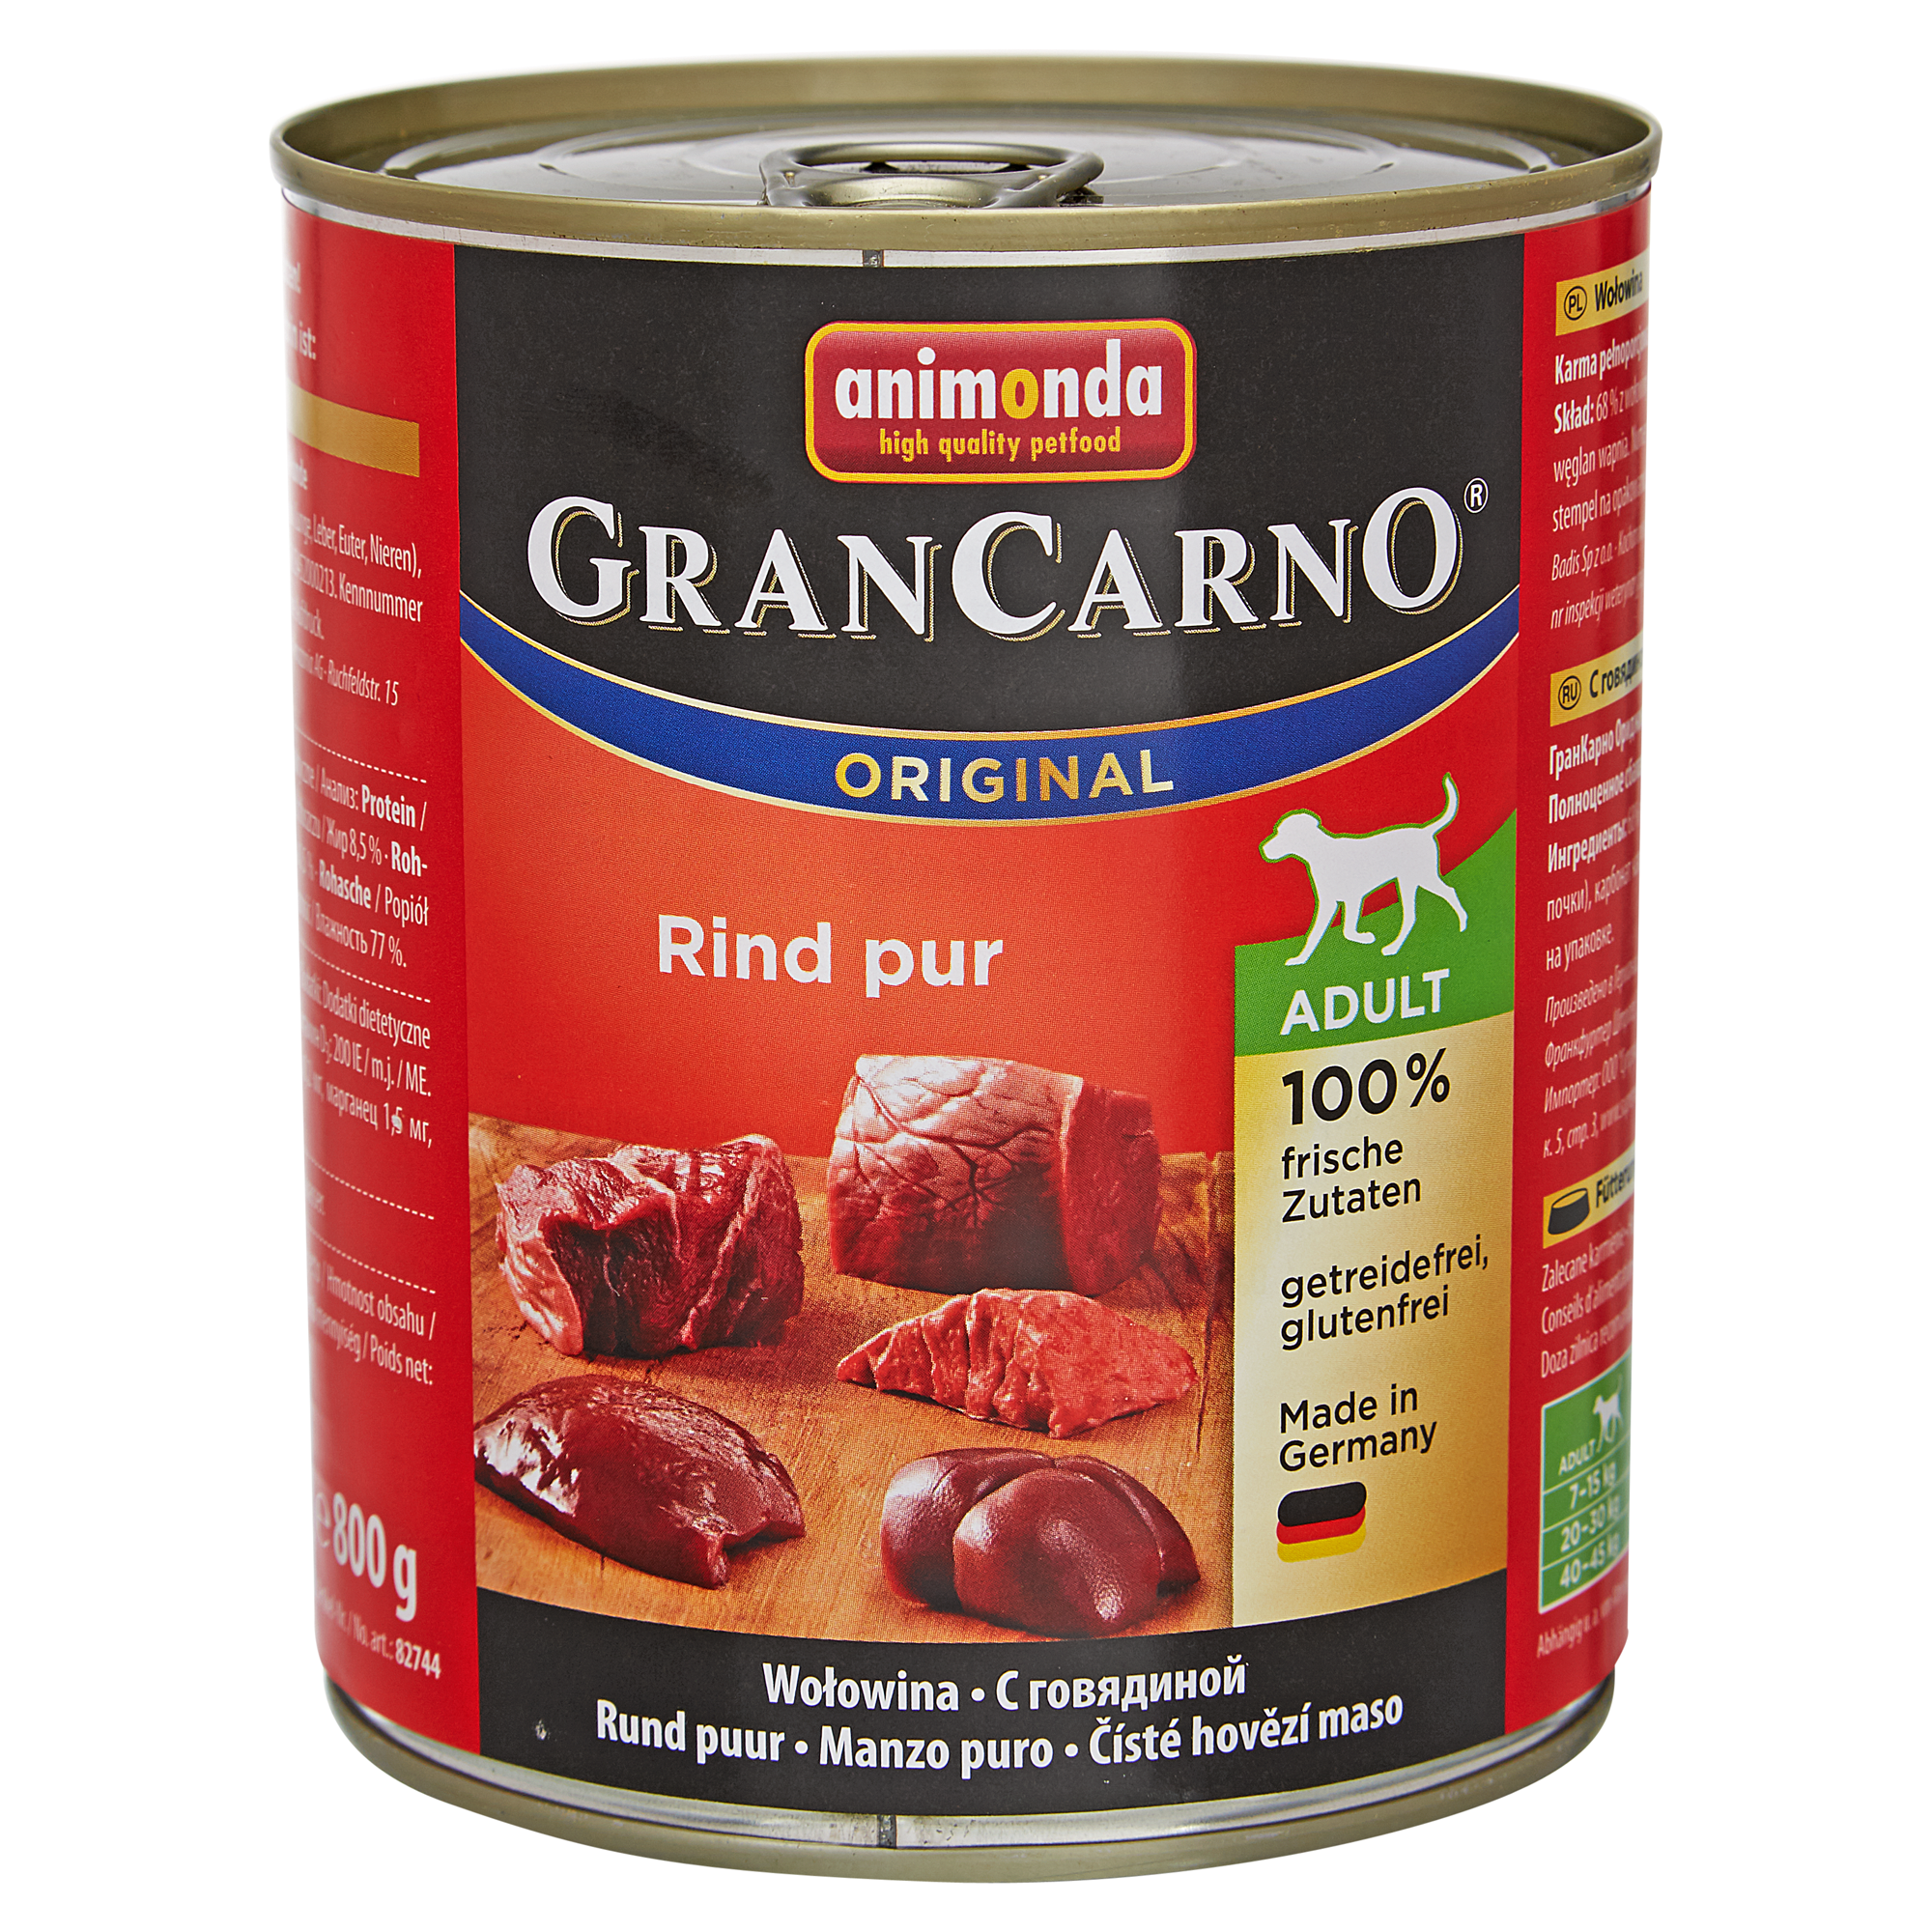 Hundenassfutter "Gran Carno" Original Rind pur 800 g + product picture